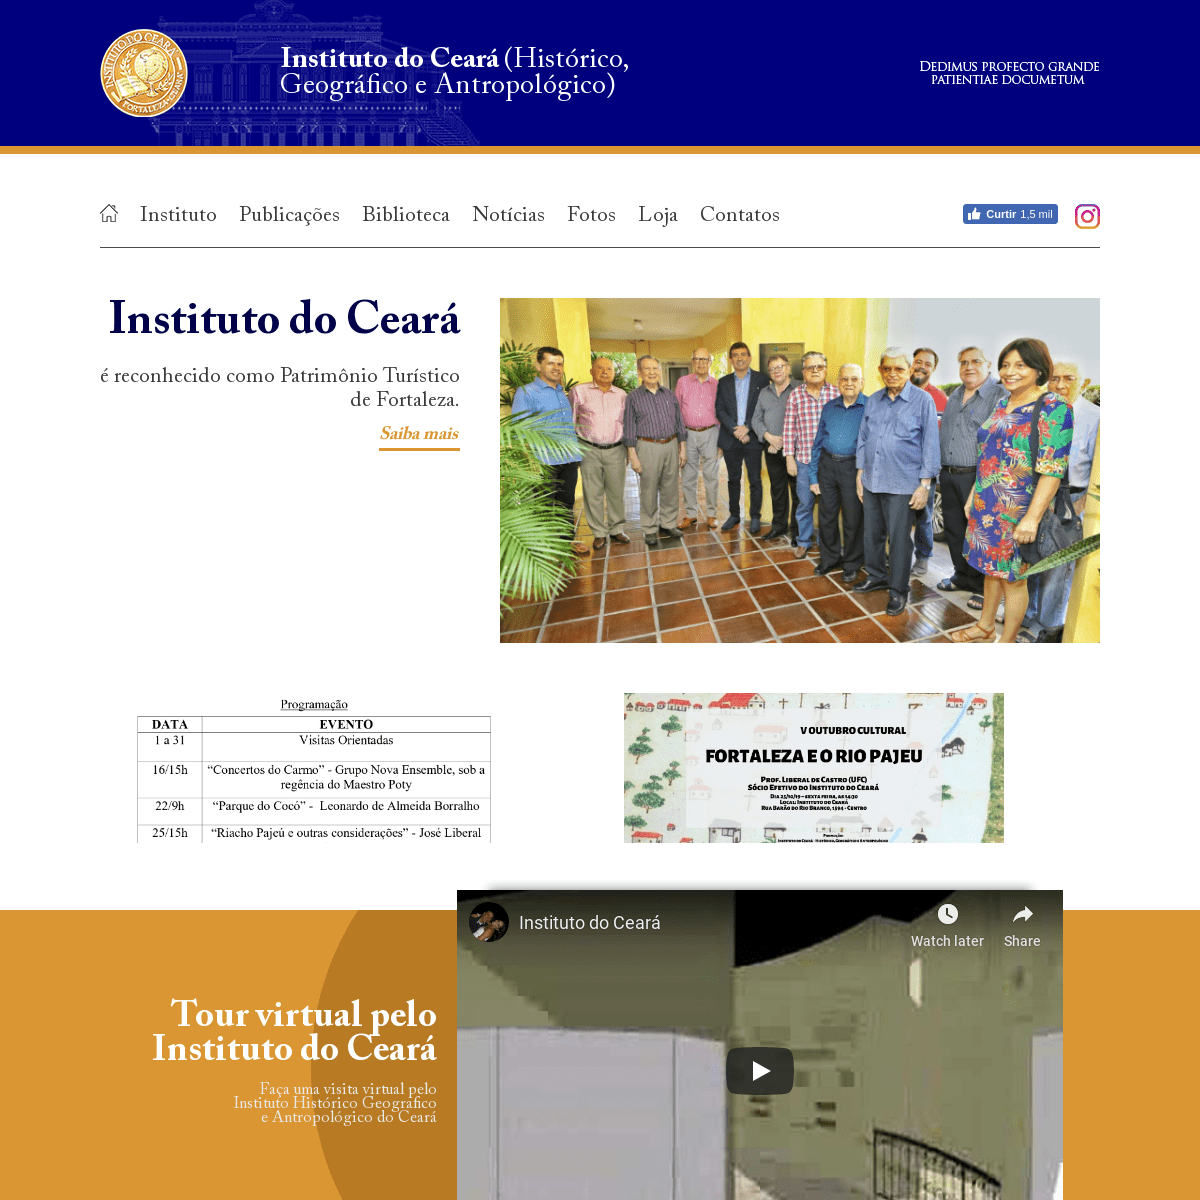 A complete backup of institutodoceara.org.br